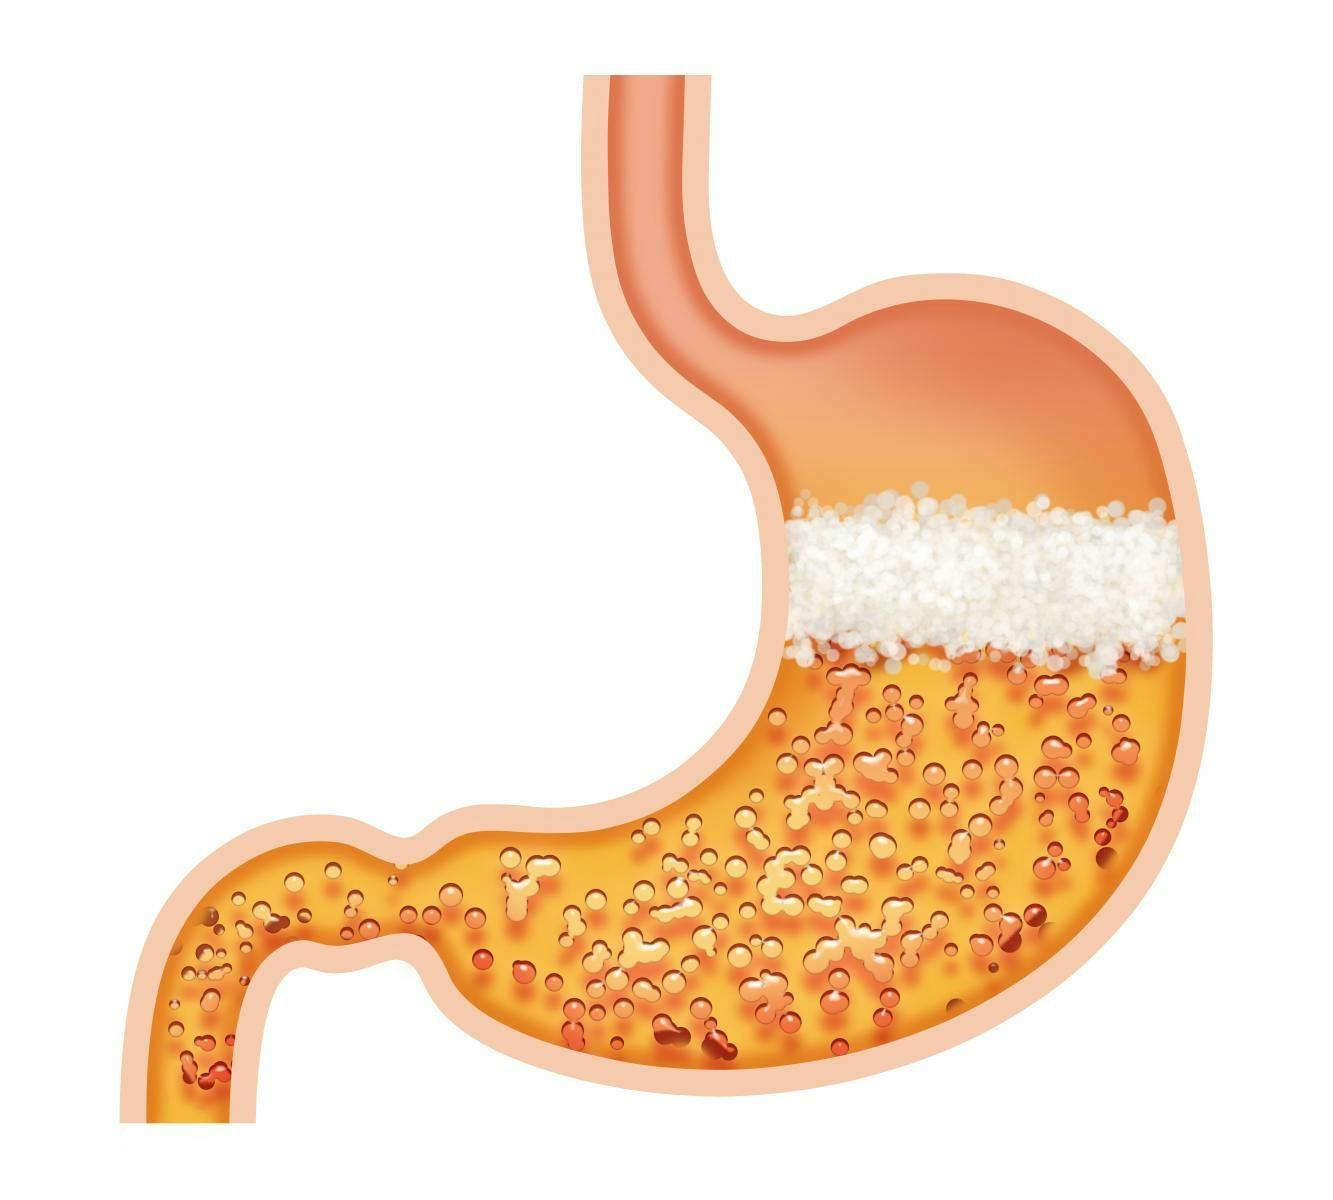 Proton Pump Inhibitors: How to Deprescribe These Nutrient Robbers 